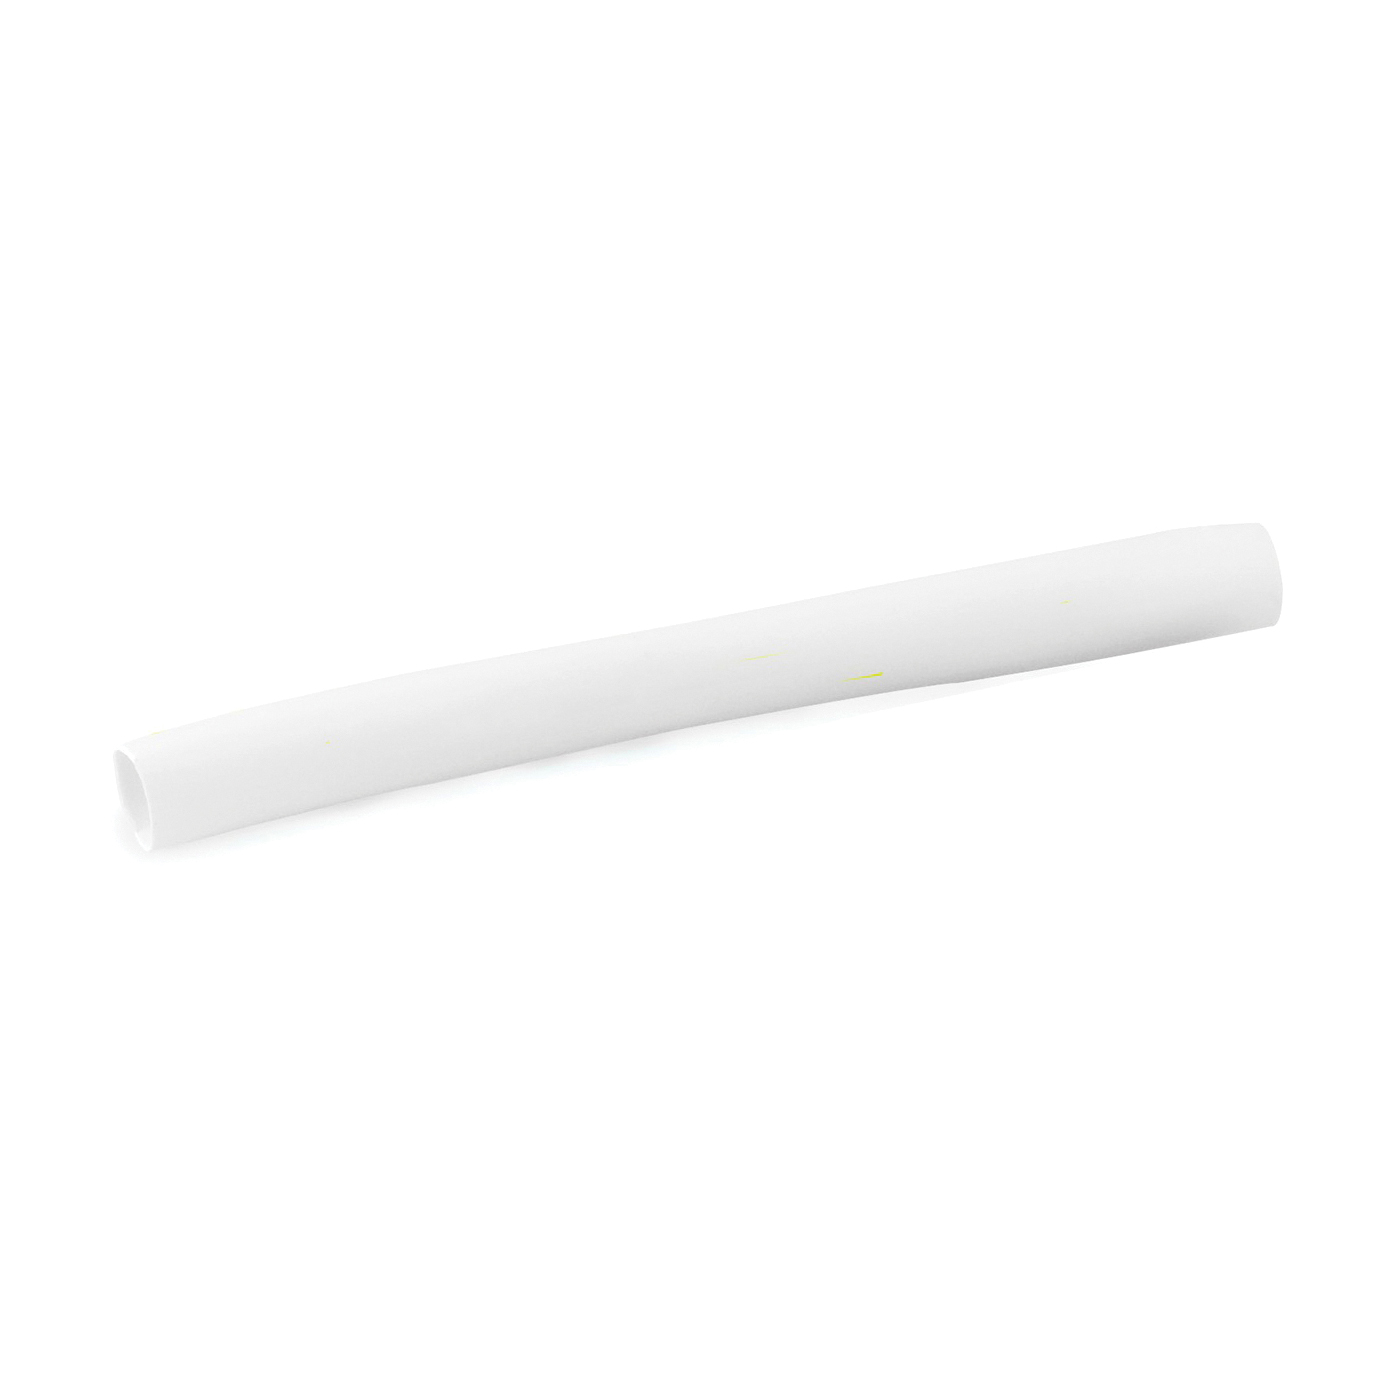 GB HST-187W Heat Shrink Tubing, 3/16 in Expanded, 3/32 in Recovered Dia, 4 in L, Polyolefin, White - 1